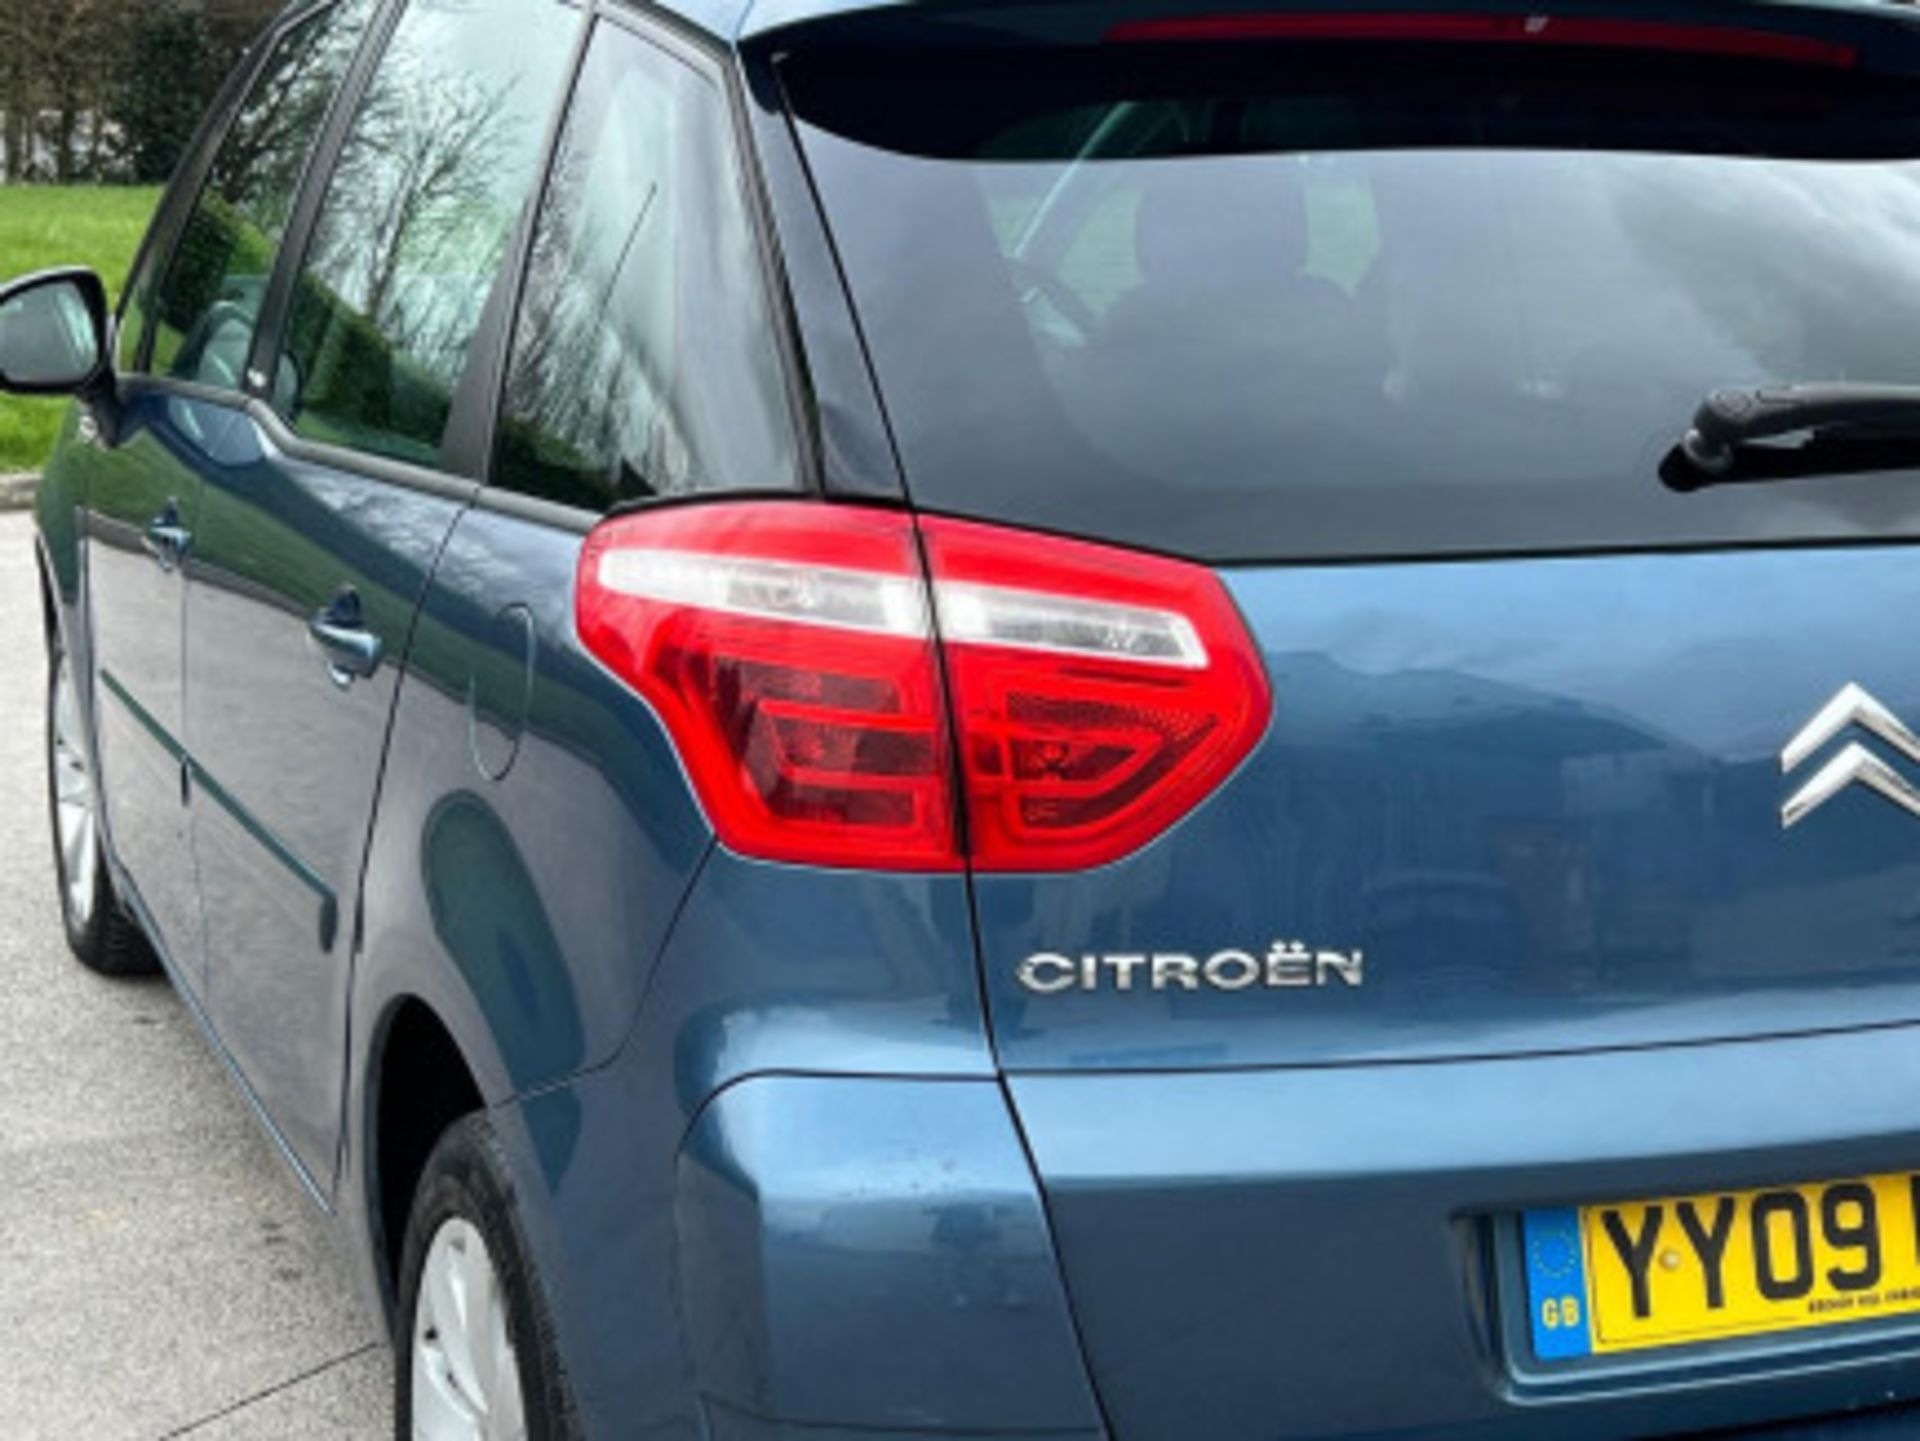 2009 CITROEN C4 PICASSO 1.6 HDI VTR+ EGS6 5DR >>--NO VAT ON HAMMER--<< - Image 28 of 123